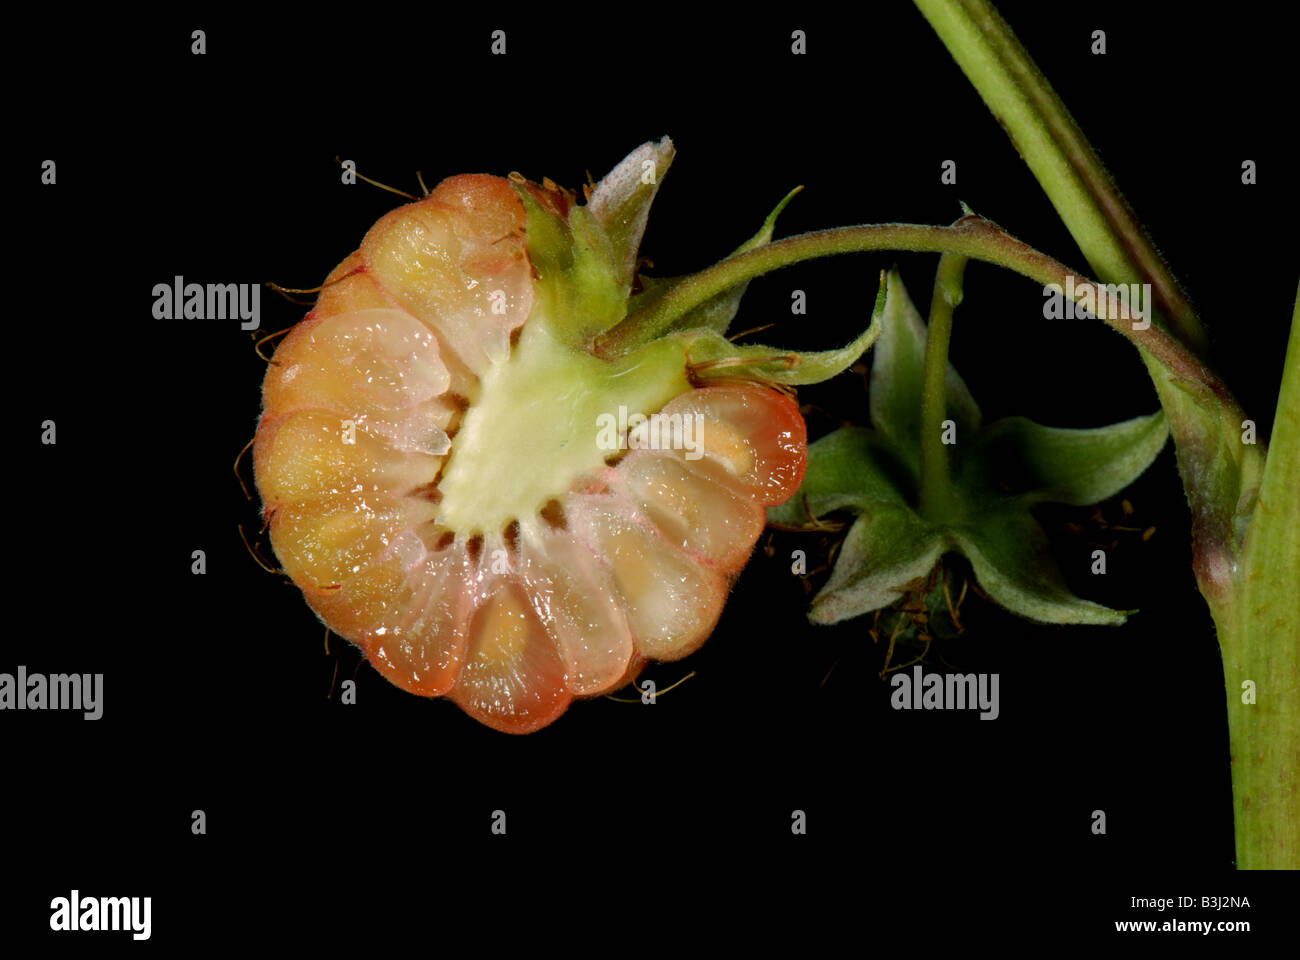 Section through a ripe raspberry fruit showing druplets and receptacle Stock Photo